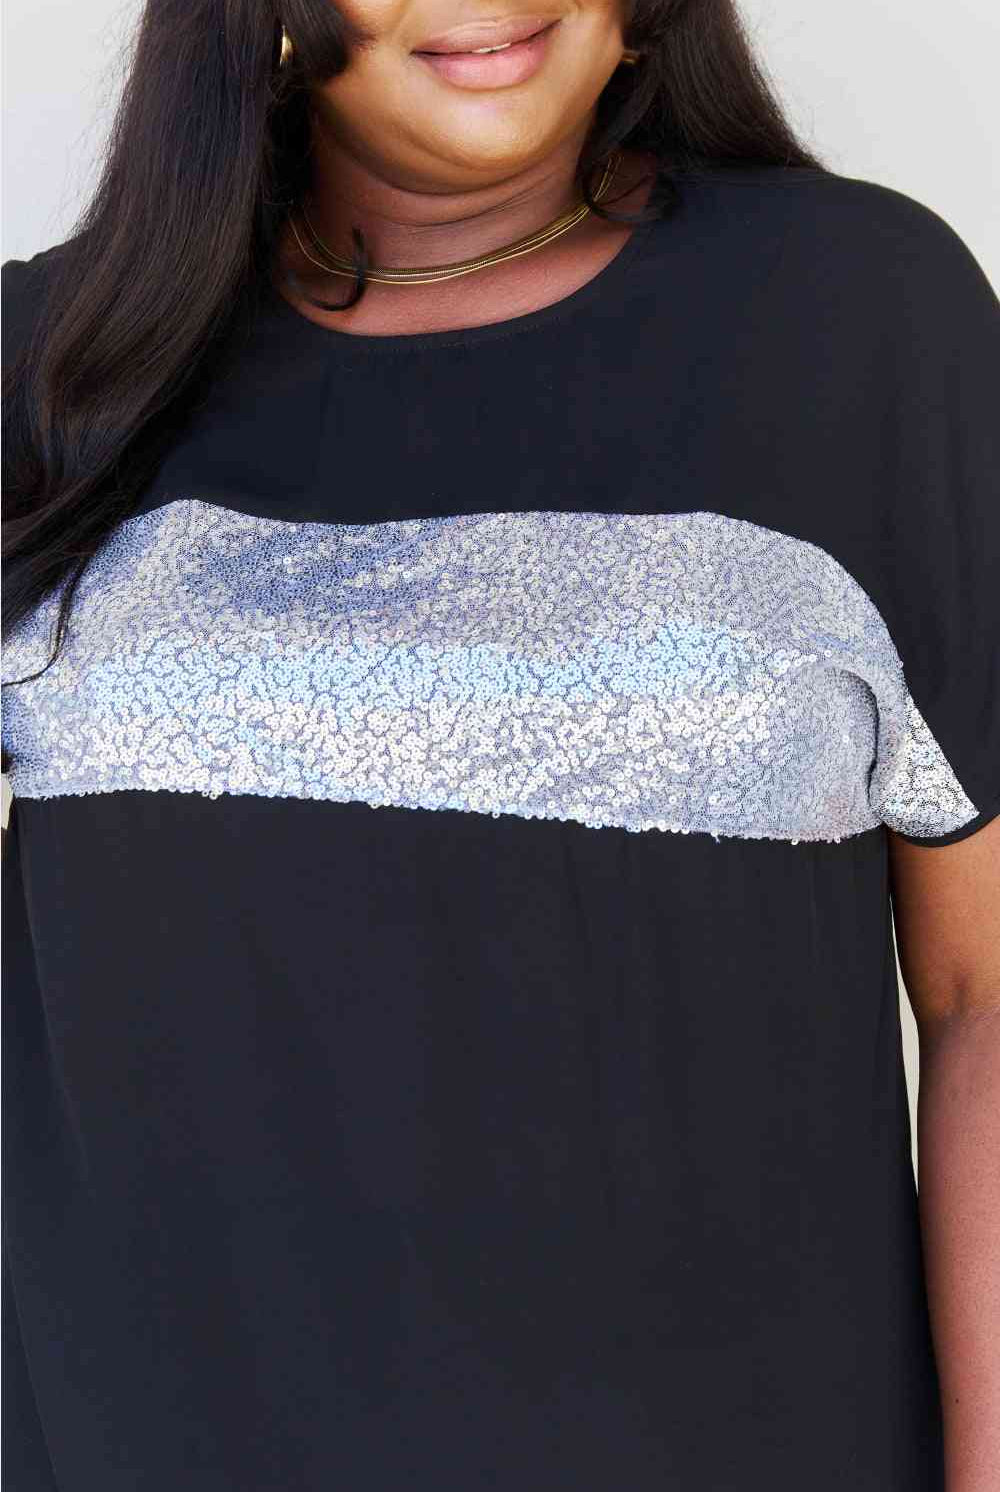 Gray Sew In Love Shine Bright Full Size Center Mesh Sequin Top in Black/Silver Clothing